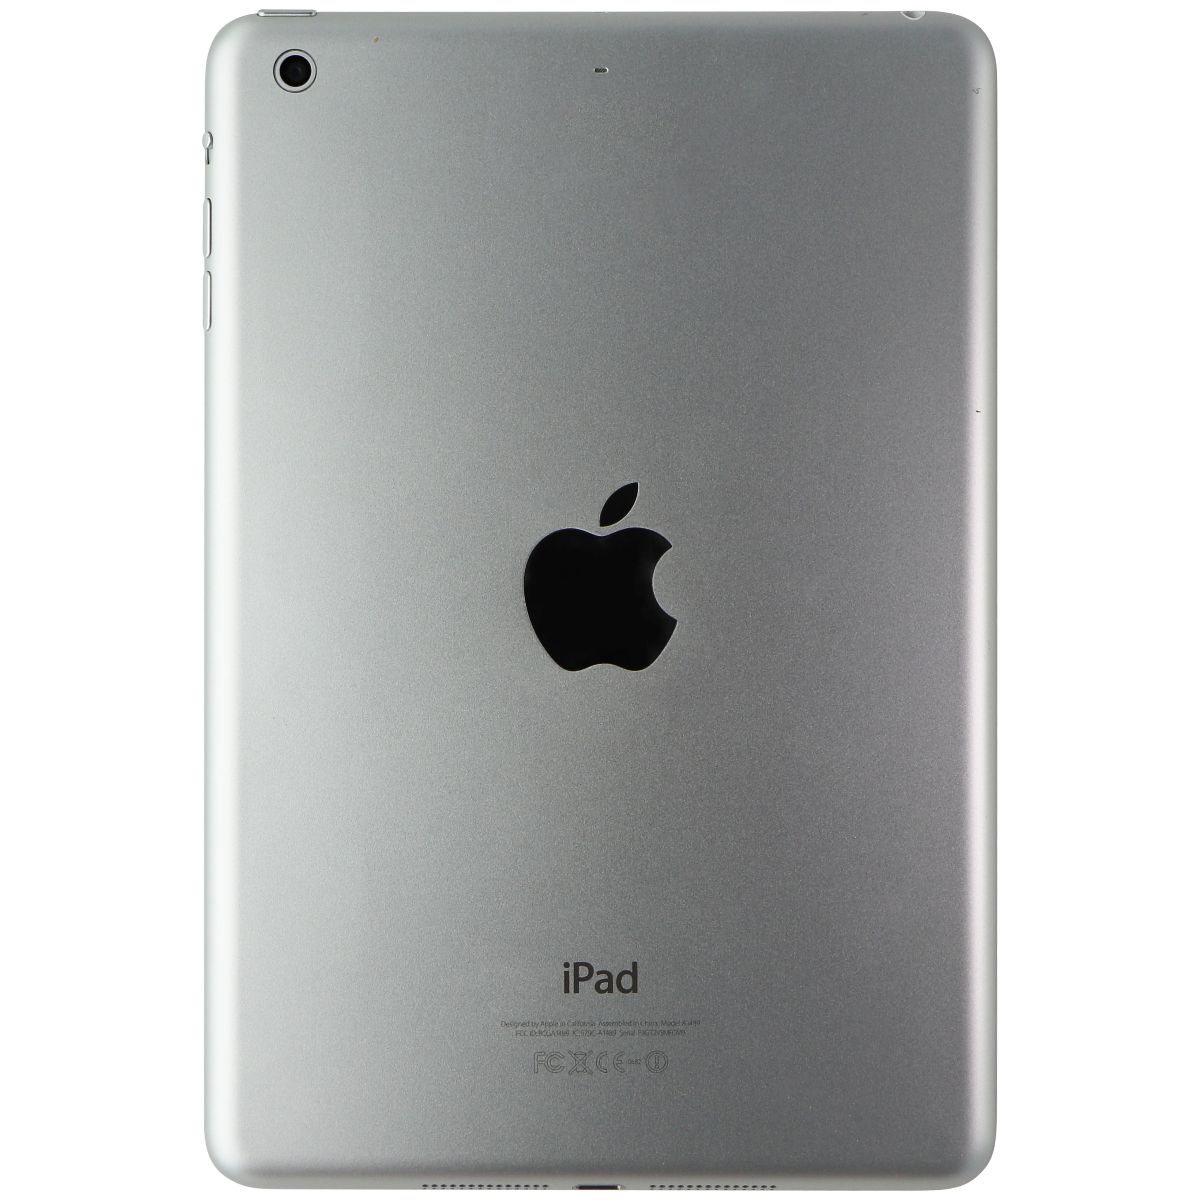 Apple iPad mini 2 (7.9-inch) Tablet (A1489) Wi-Fi ONLY - 16GB / Silver iPads, Tablets & eBook Readers Apple    - Simple Cell Bulk Wholesale Pricing - USA Seller